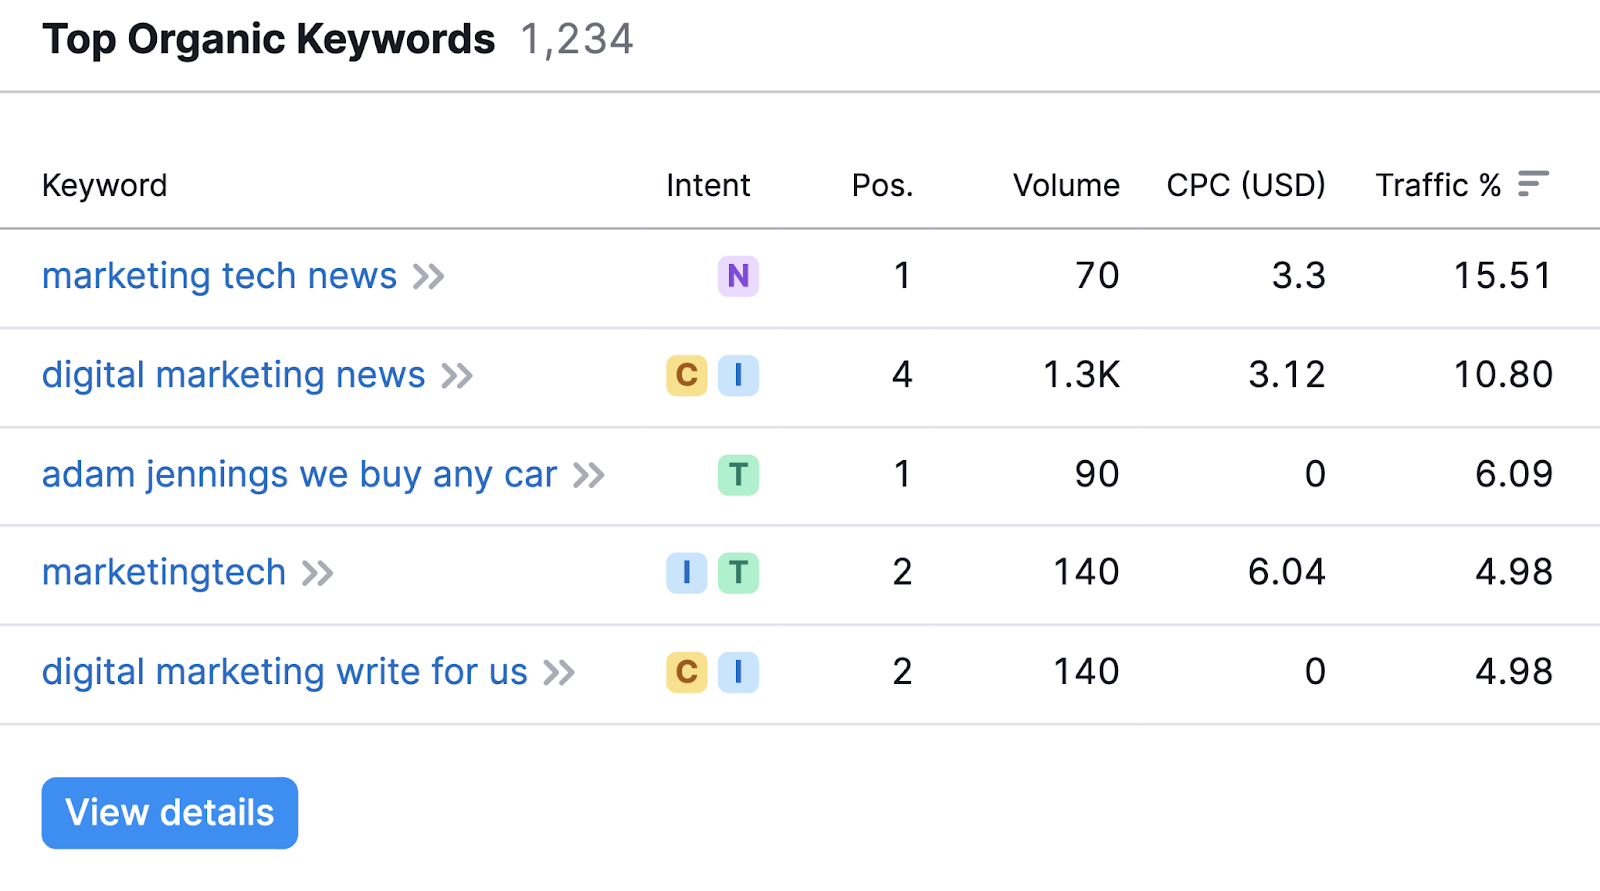 “Top Organic Keywords” table in Domain Overview tool